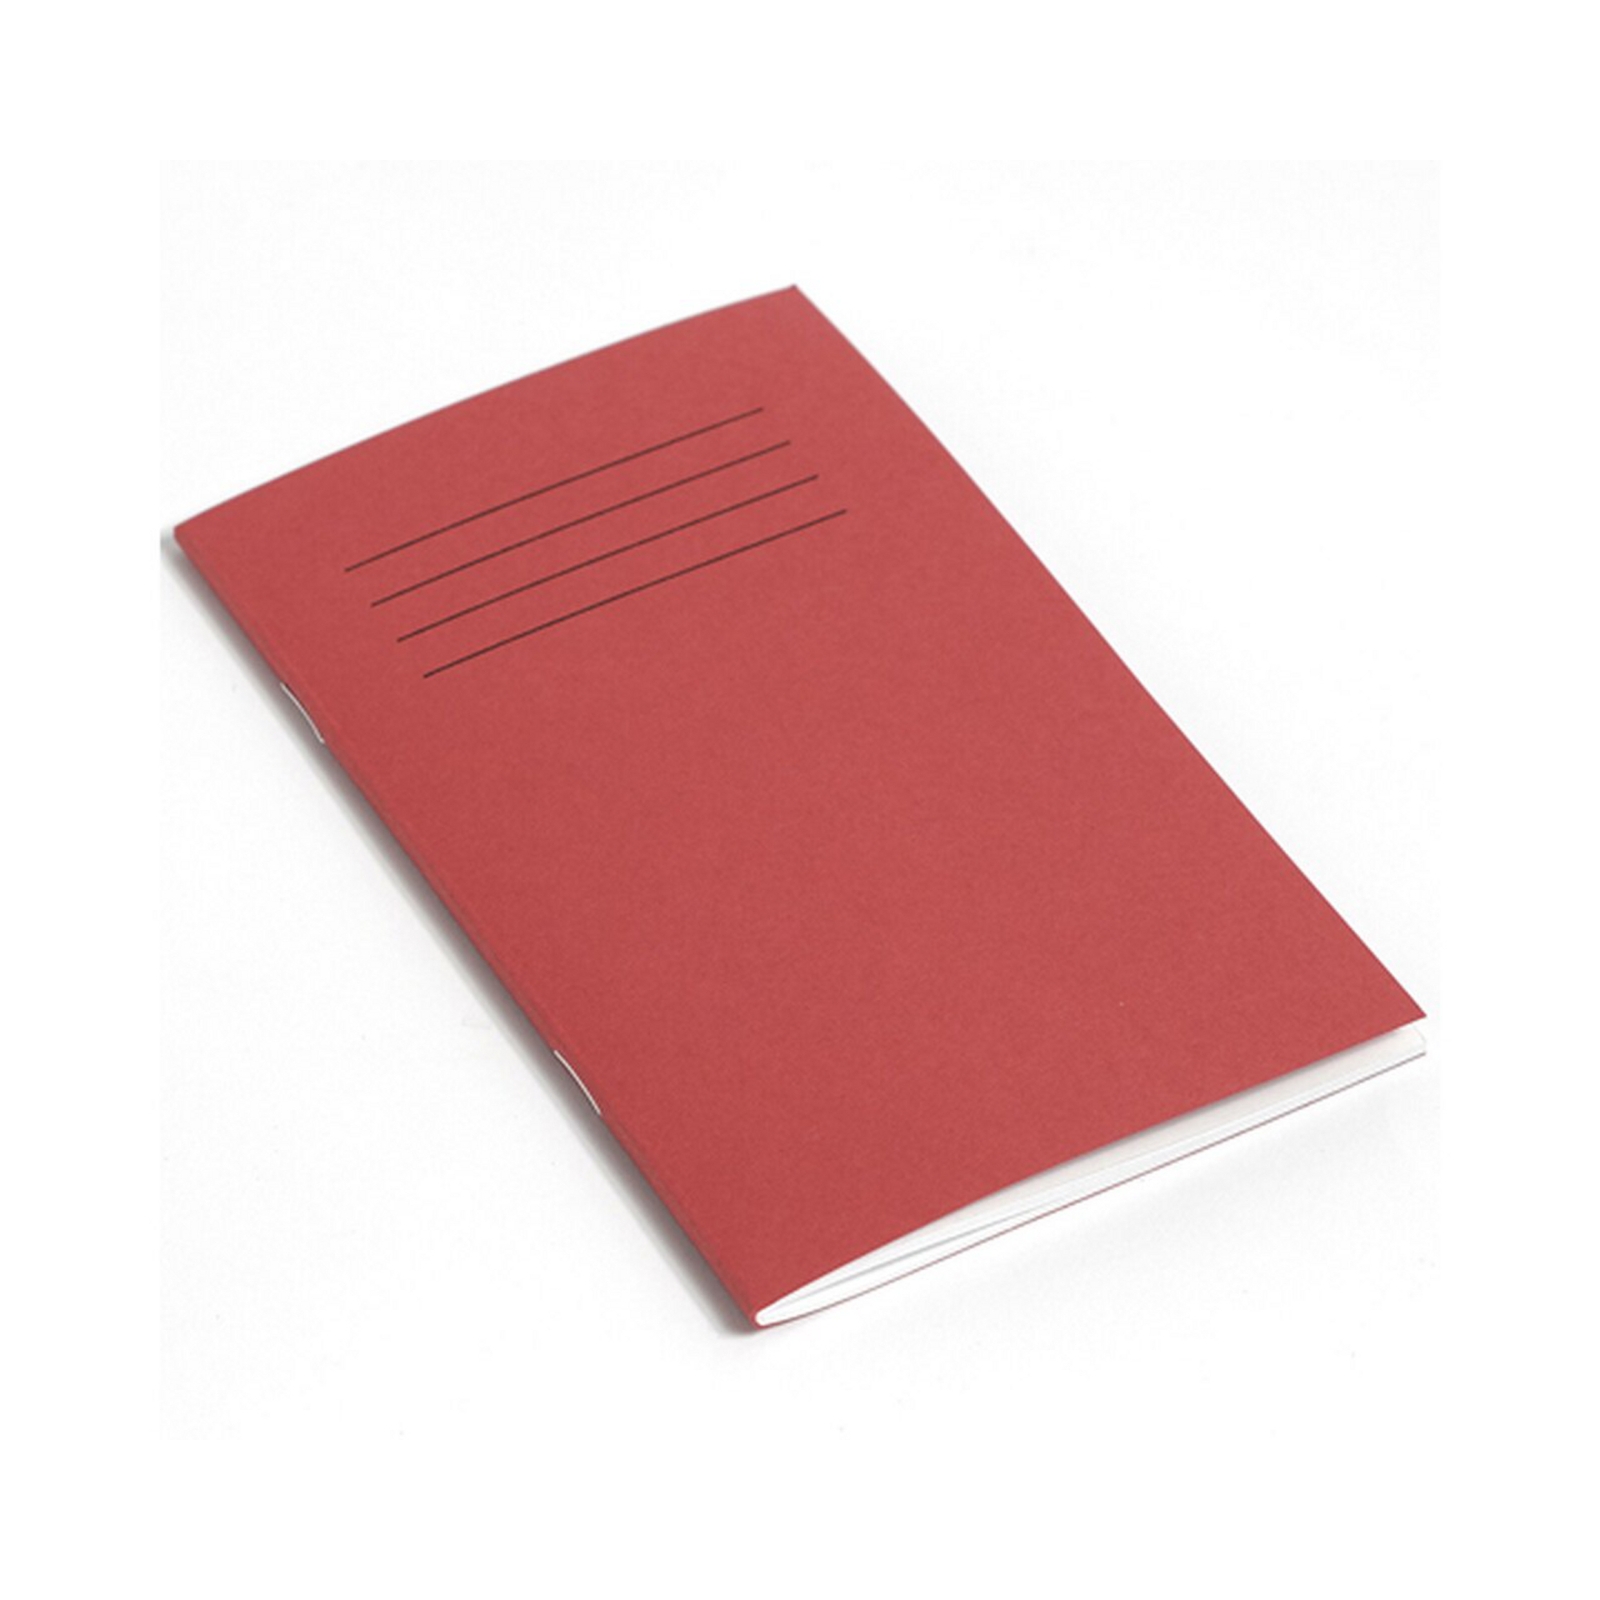 8 x 4"/200 x 100mm Red Cover 7mm Ruled Vocabulary Book - 48 Pages - Pack of 100